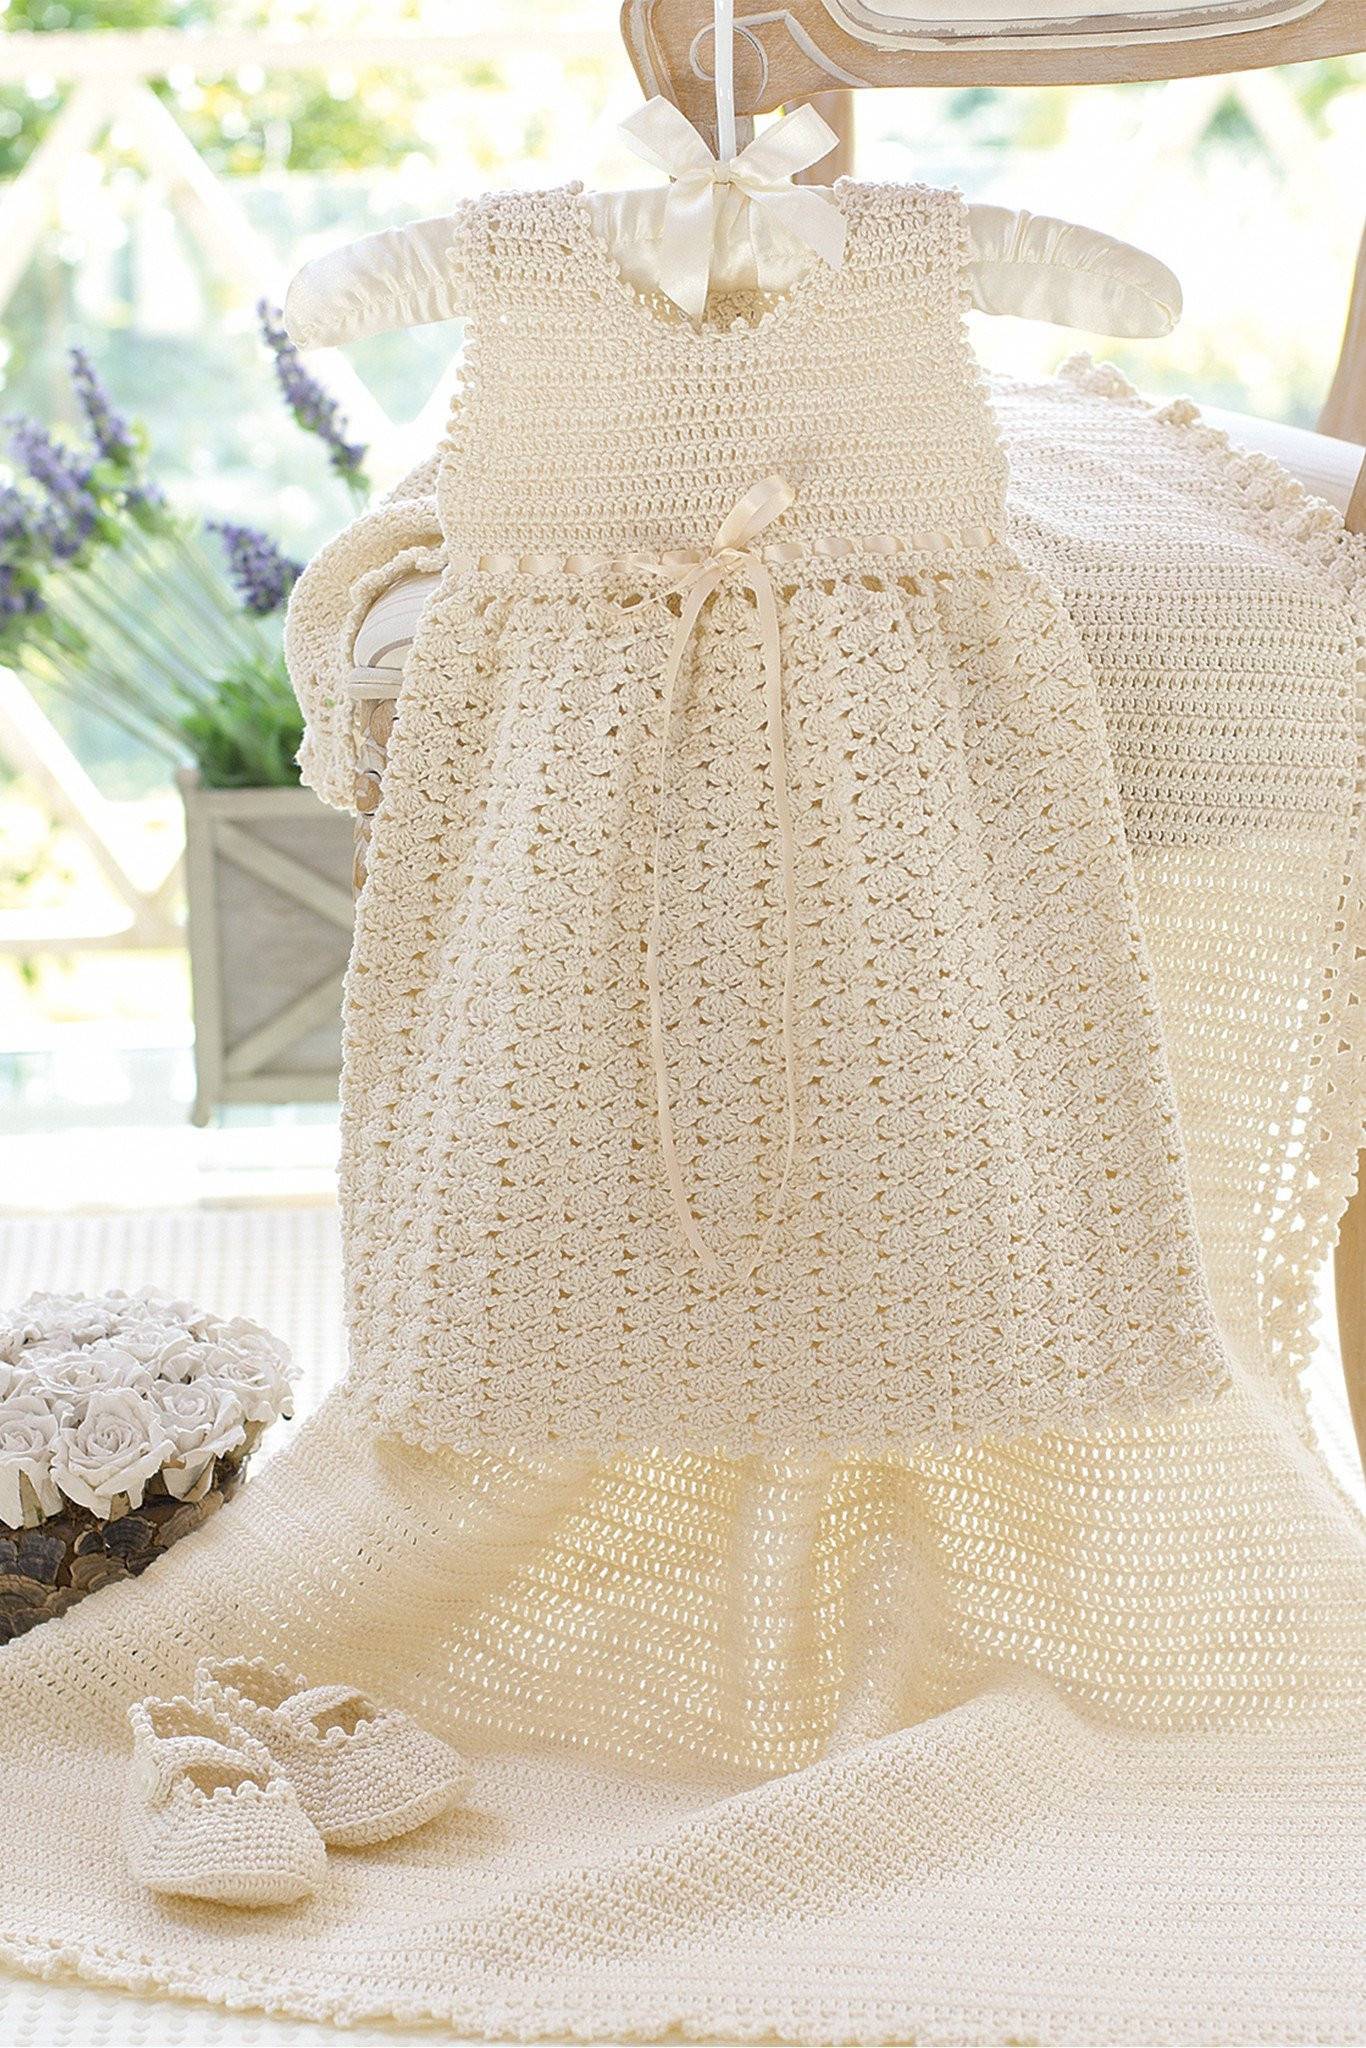 Buy Crochet Christening Gown Online In India - Etsy India